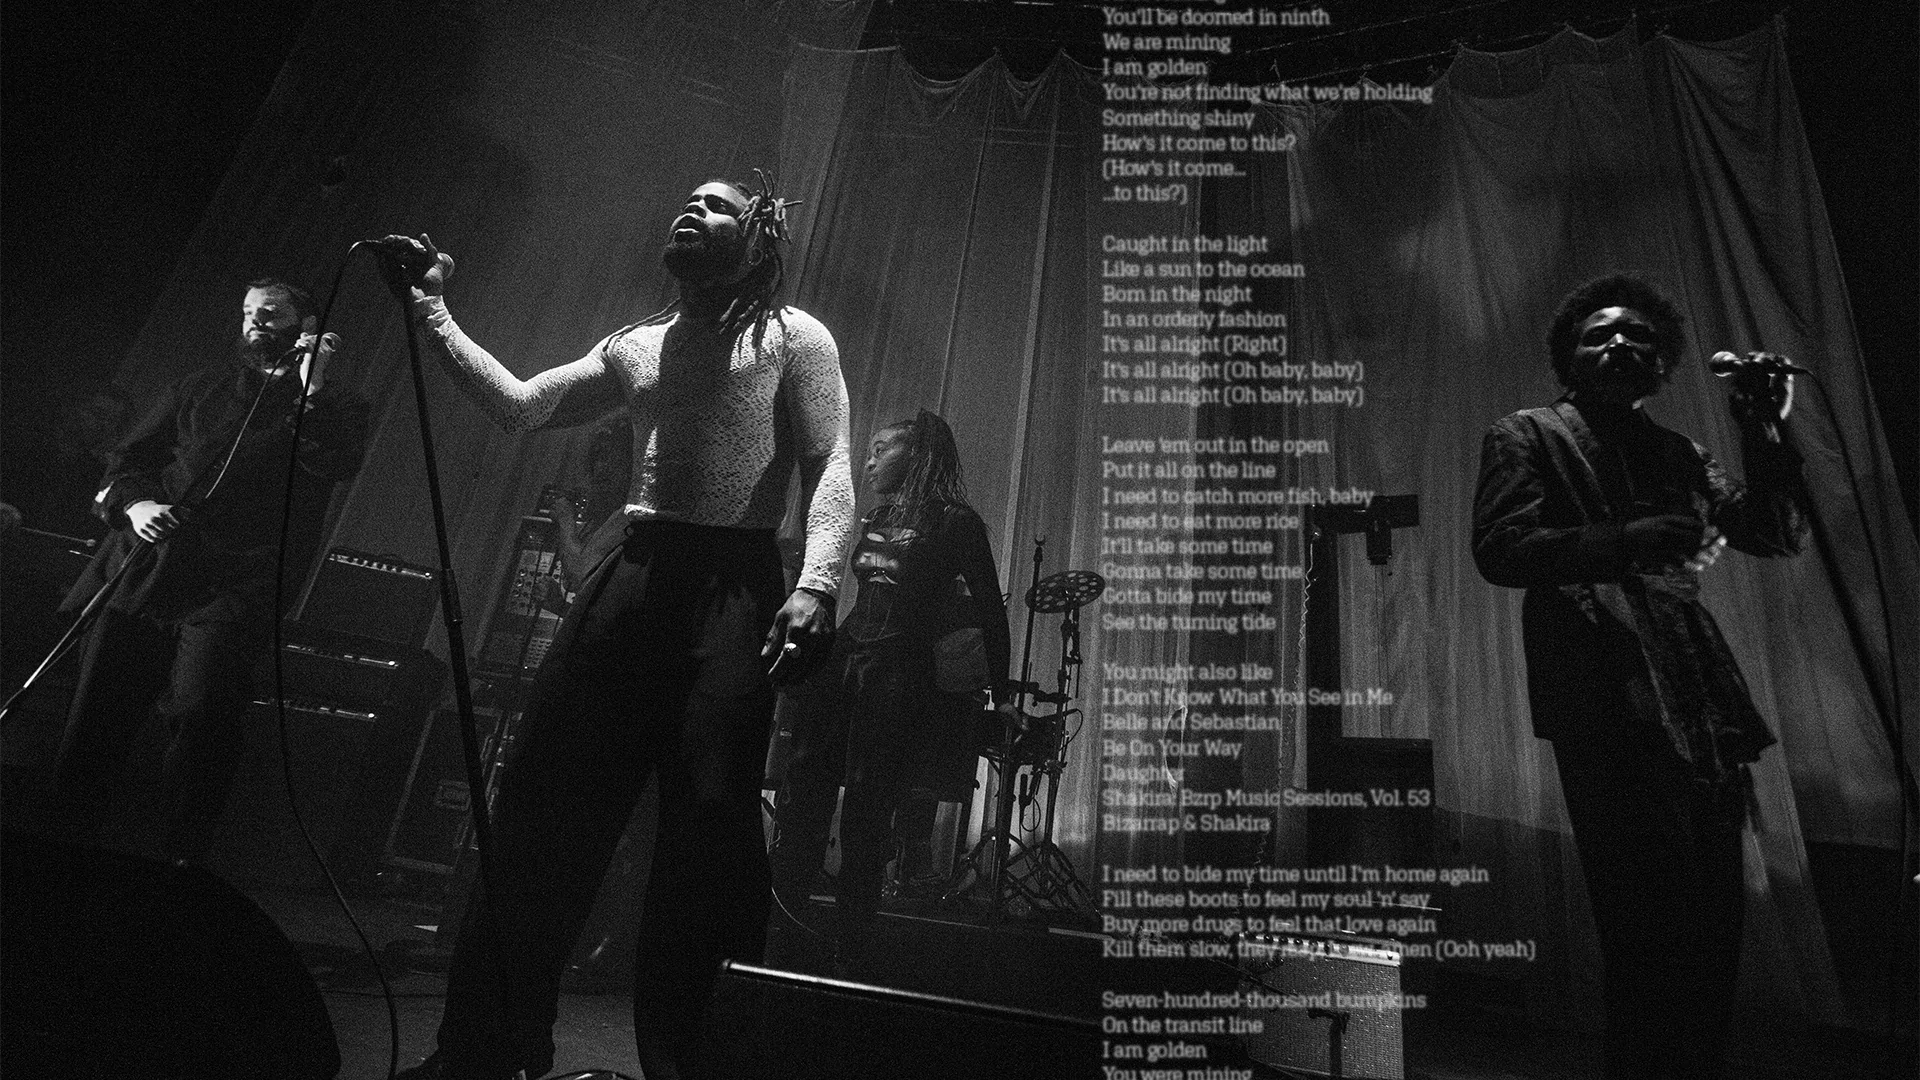 Photo of Young Fathers performing on stage in black and white with blurry lyrics